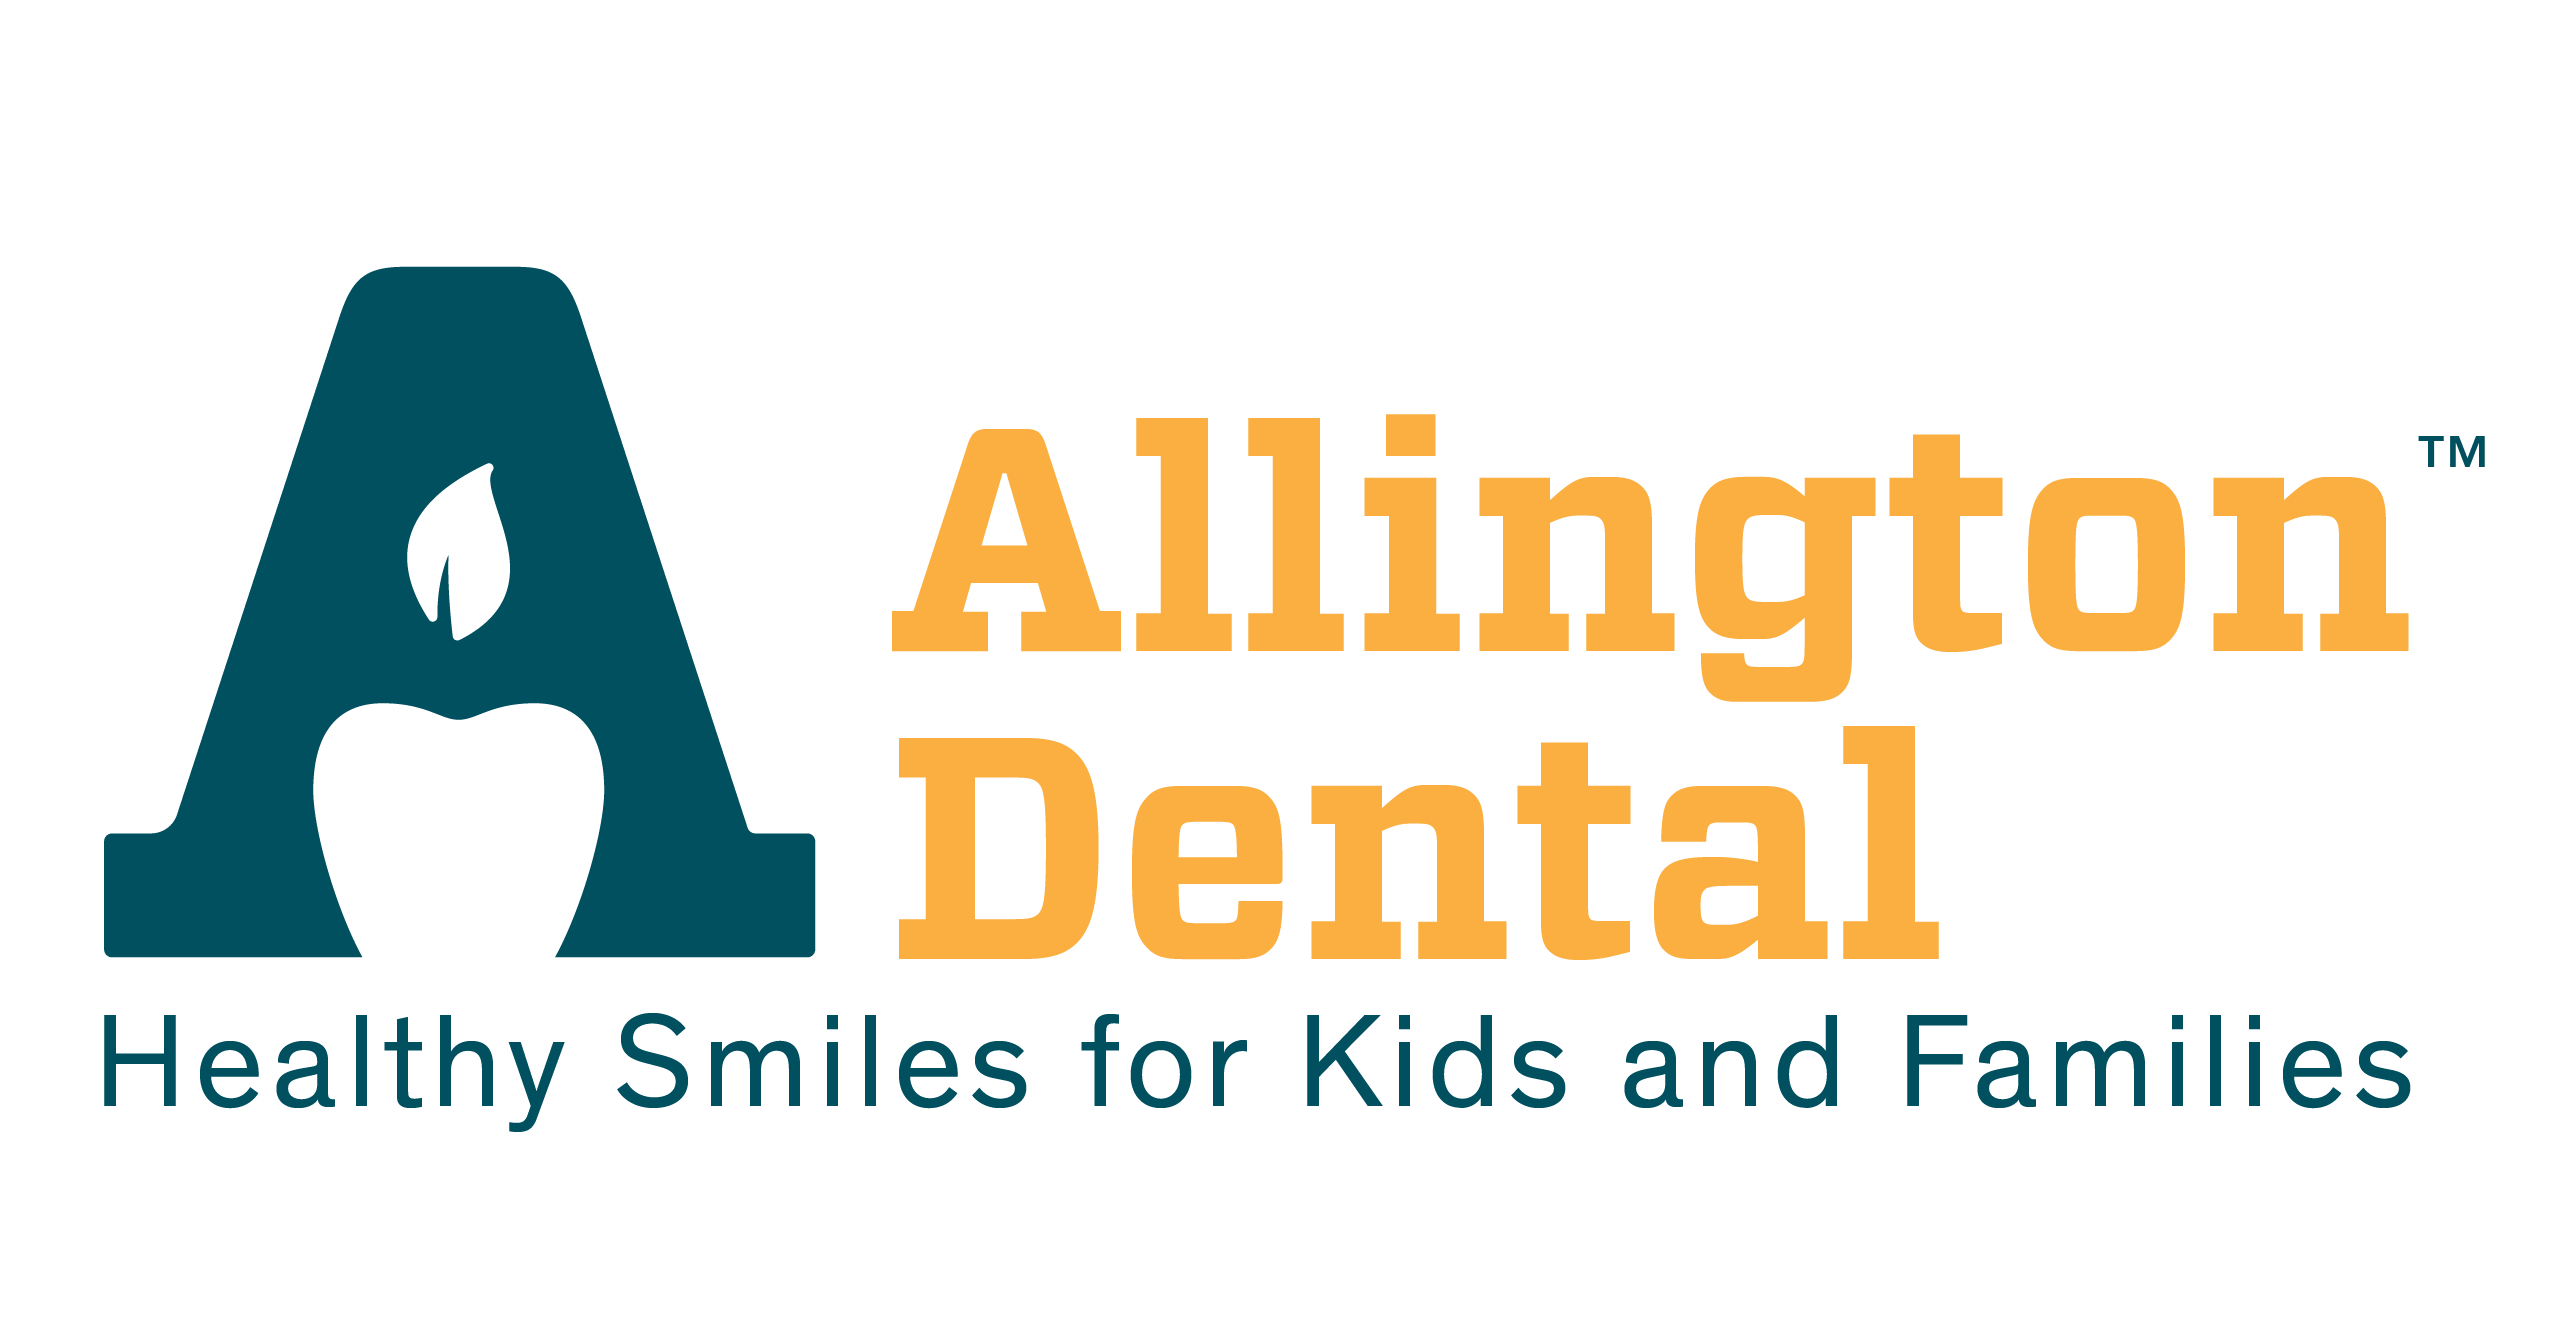 Appointment Logo - Allington Dental. Schedule an Appointment Today